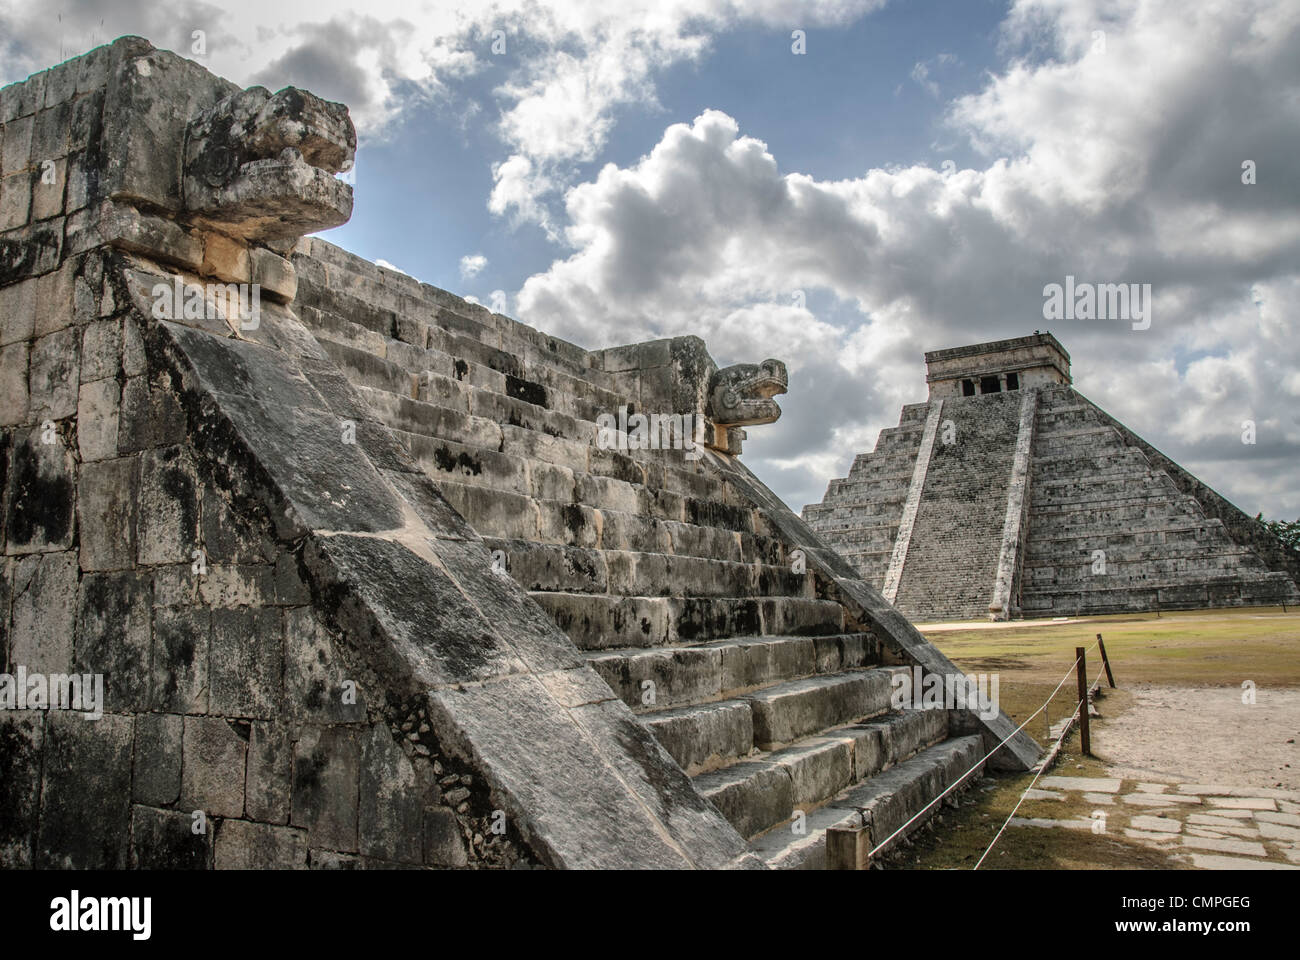 CHICHEN ITZA, Mexico - In the background at right is the Temple of Kukulkan (El Castillo) and at left in the foreground are the carved jaguar heads of the Venus Platform at Chichen Itza Archeological Zone, ruins of a major Maya civilization city in the heart of Mexico's Yucatan Peninsula. Stock Photo